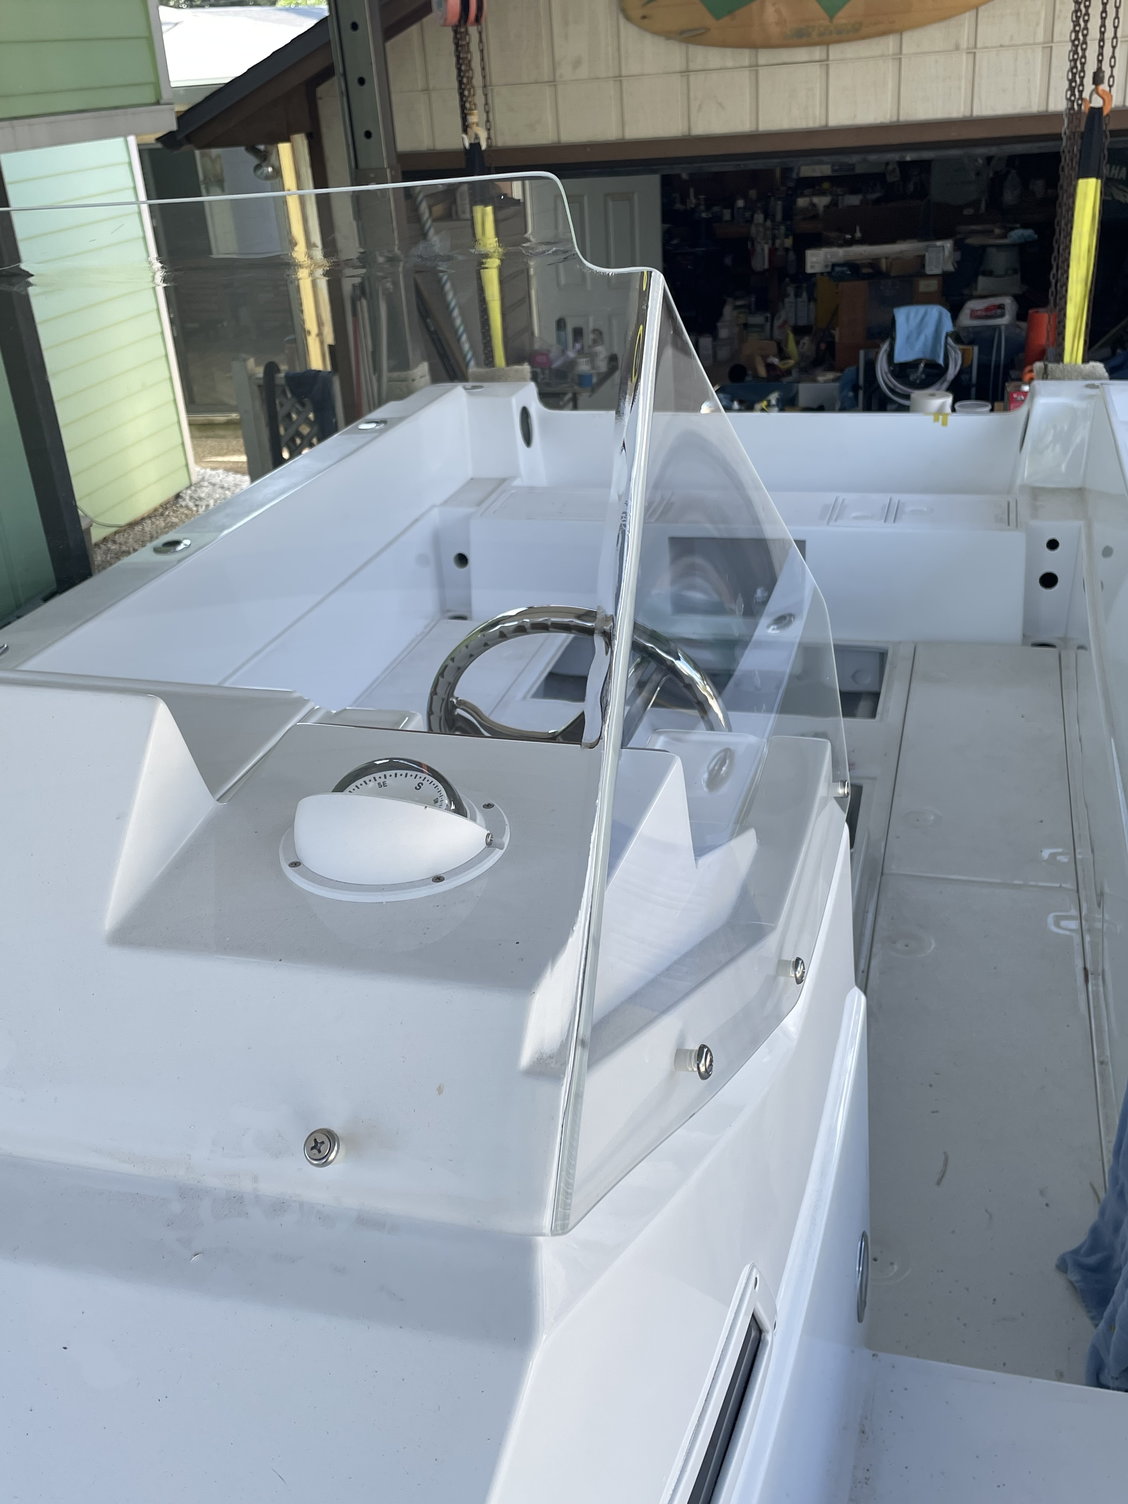 Where to get windshield made - The Hull Truth - Boating and Fishing Forum